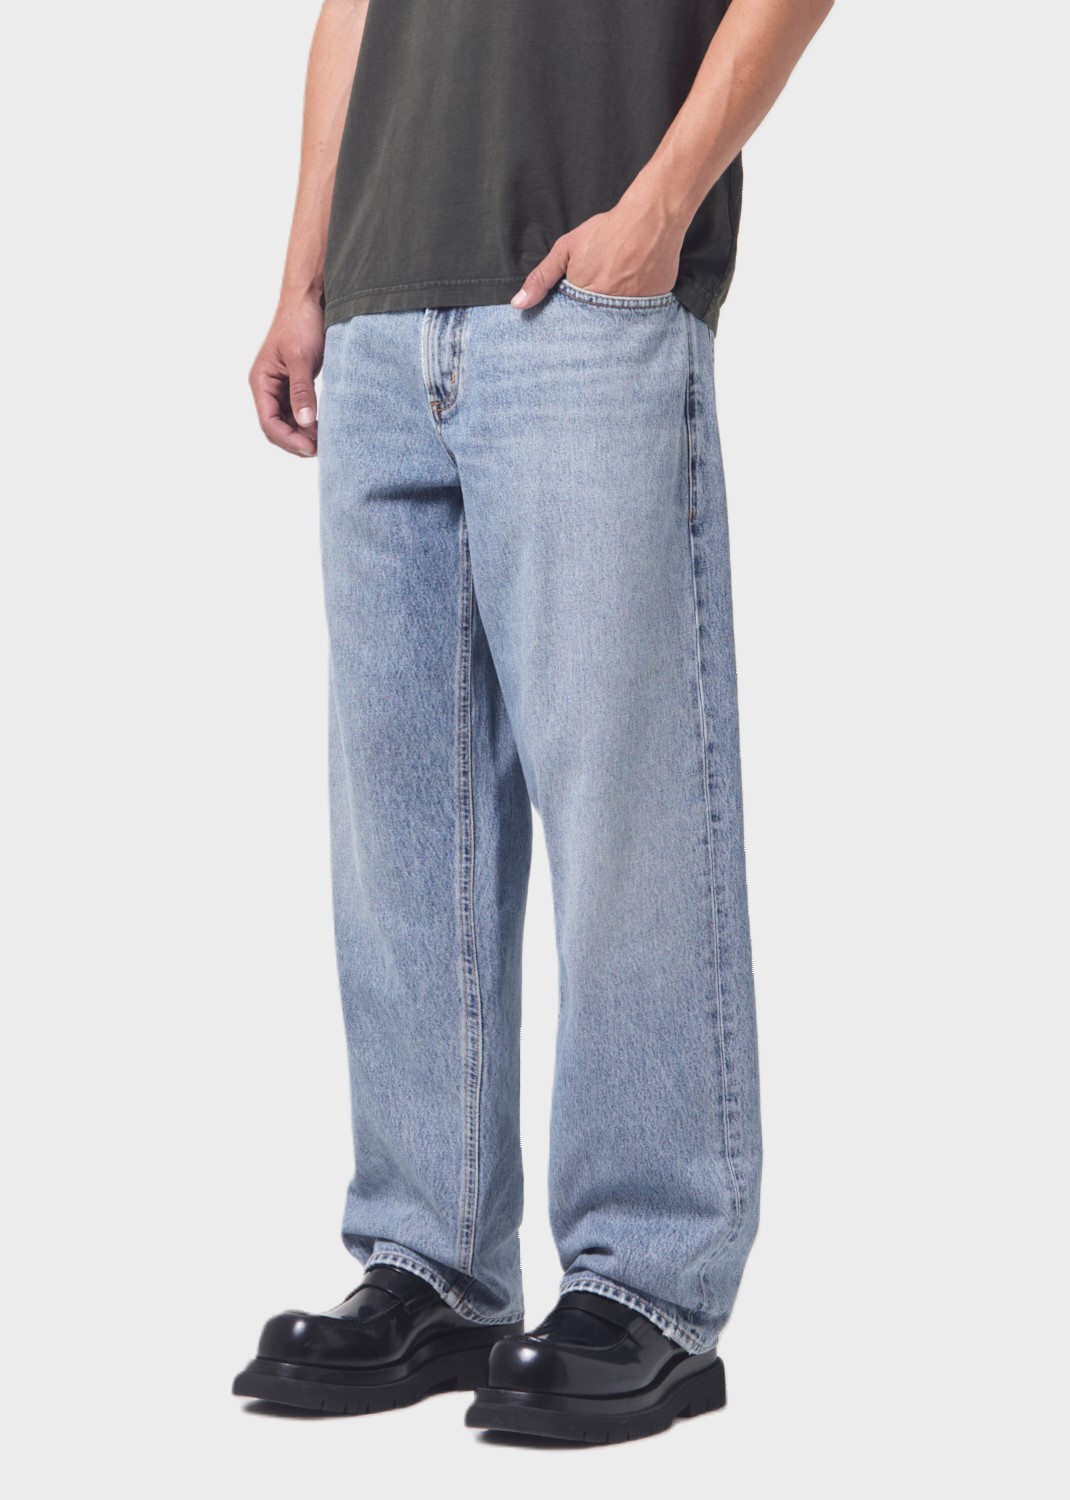 AGOLDE Fusion Jeans in Ratio Wash